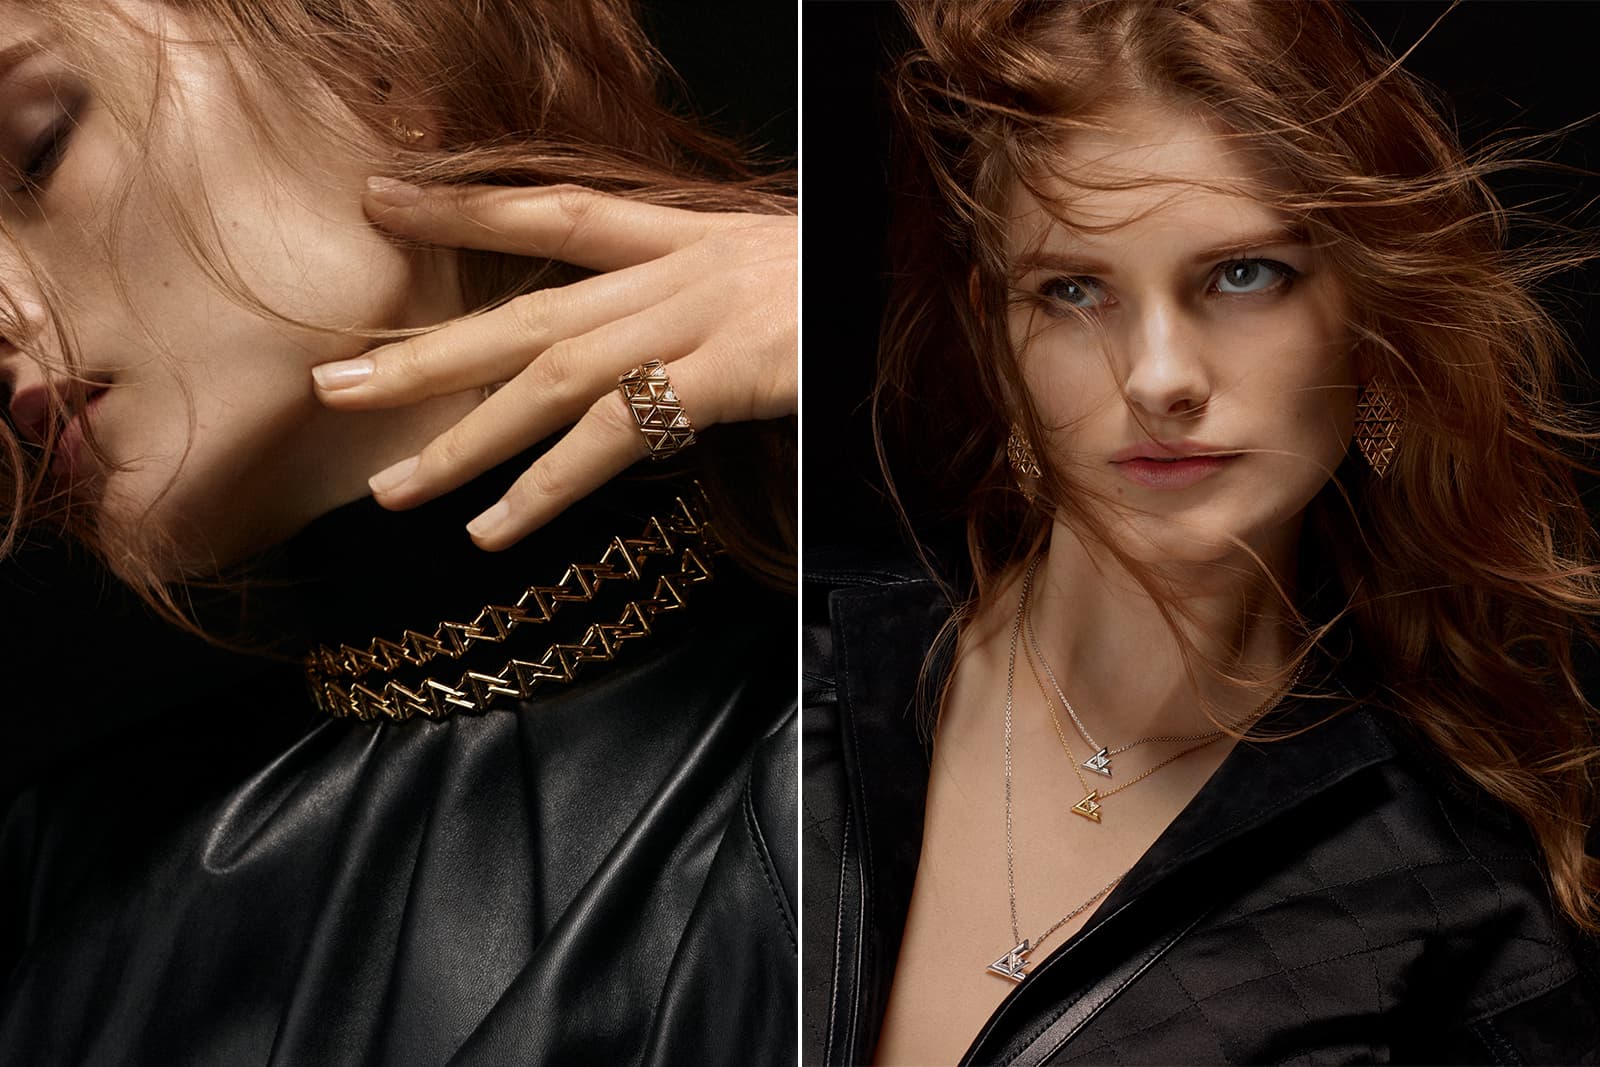 Bold, Timeless Designs From Louis Vuitton LV Volt Fine Jewellery